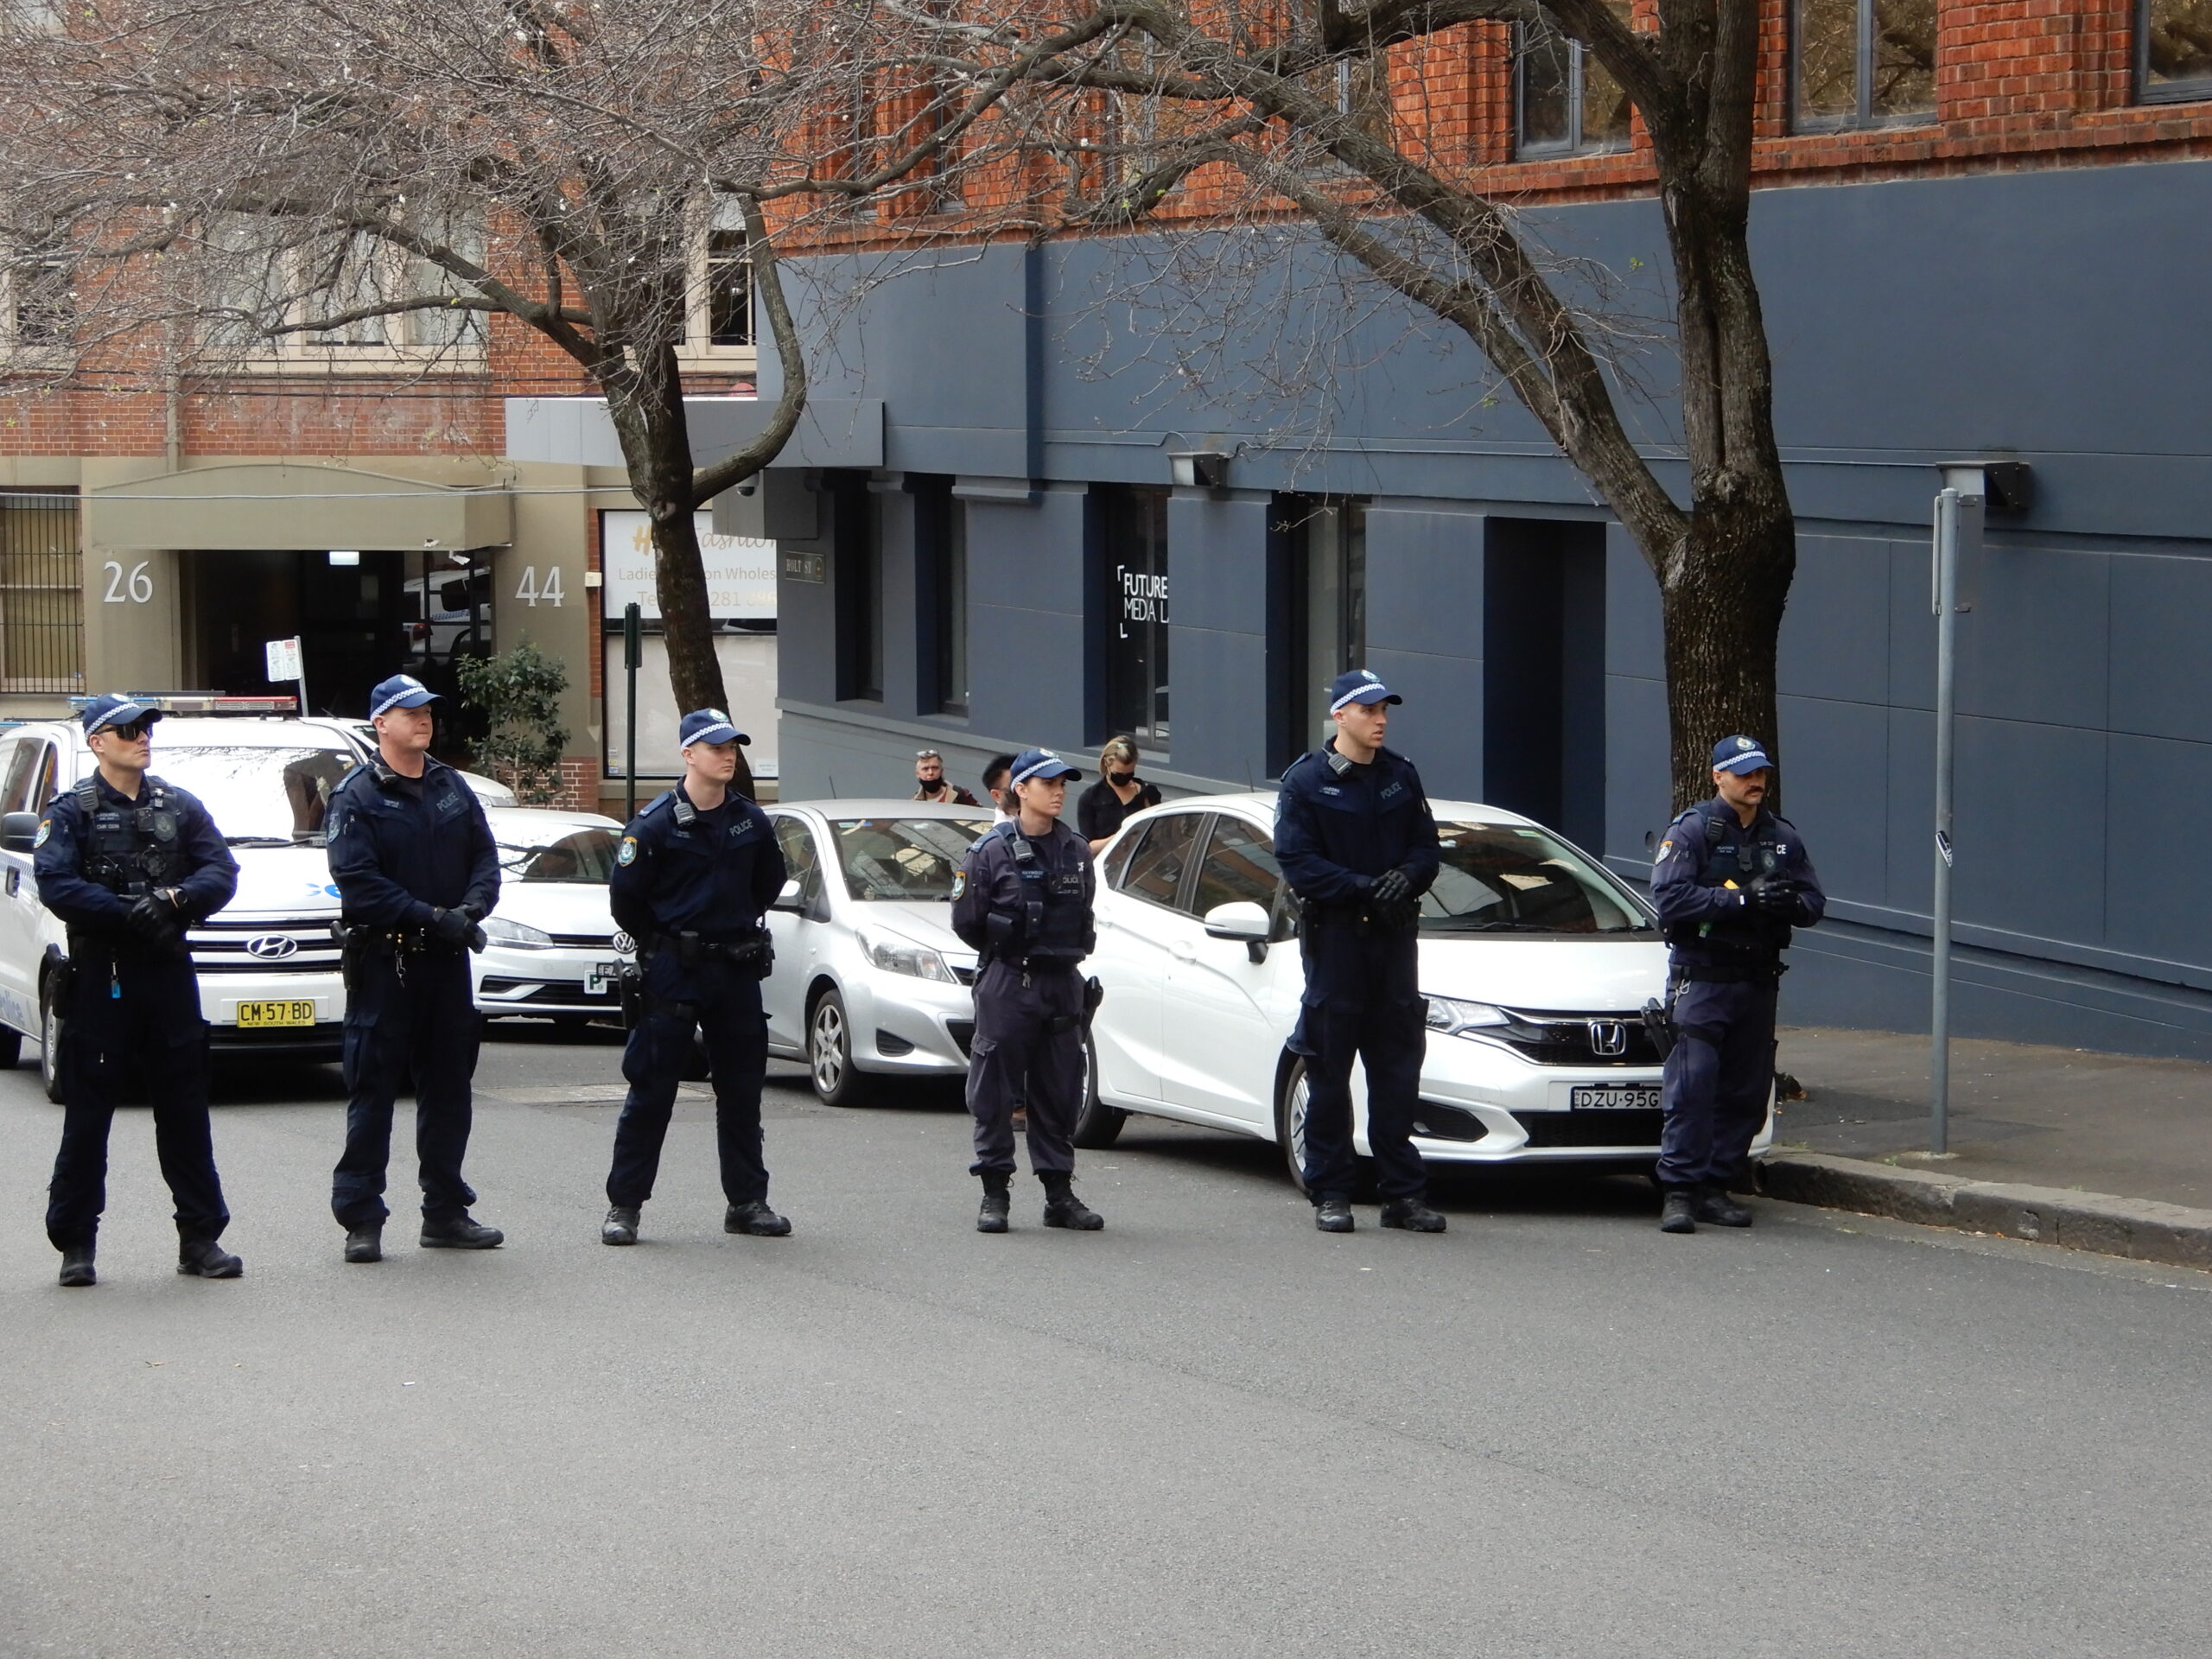 NSW police block off the street